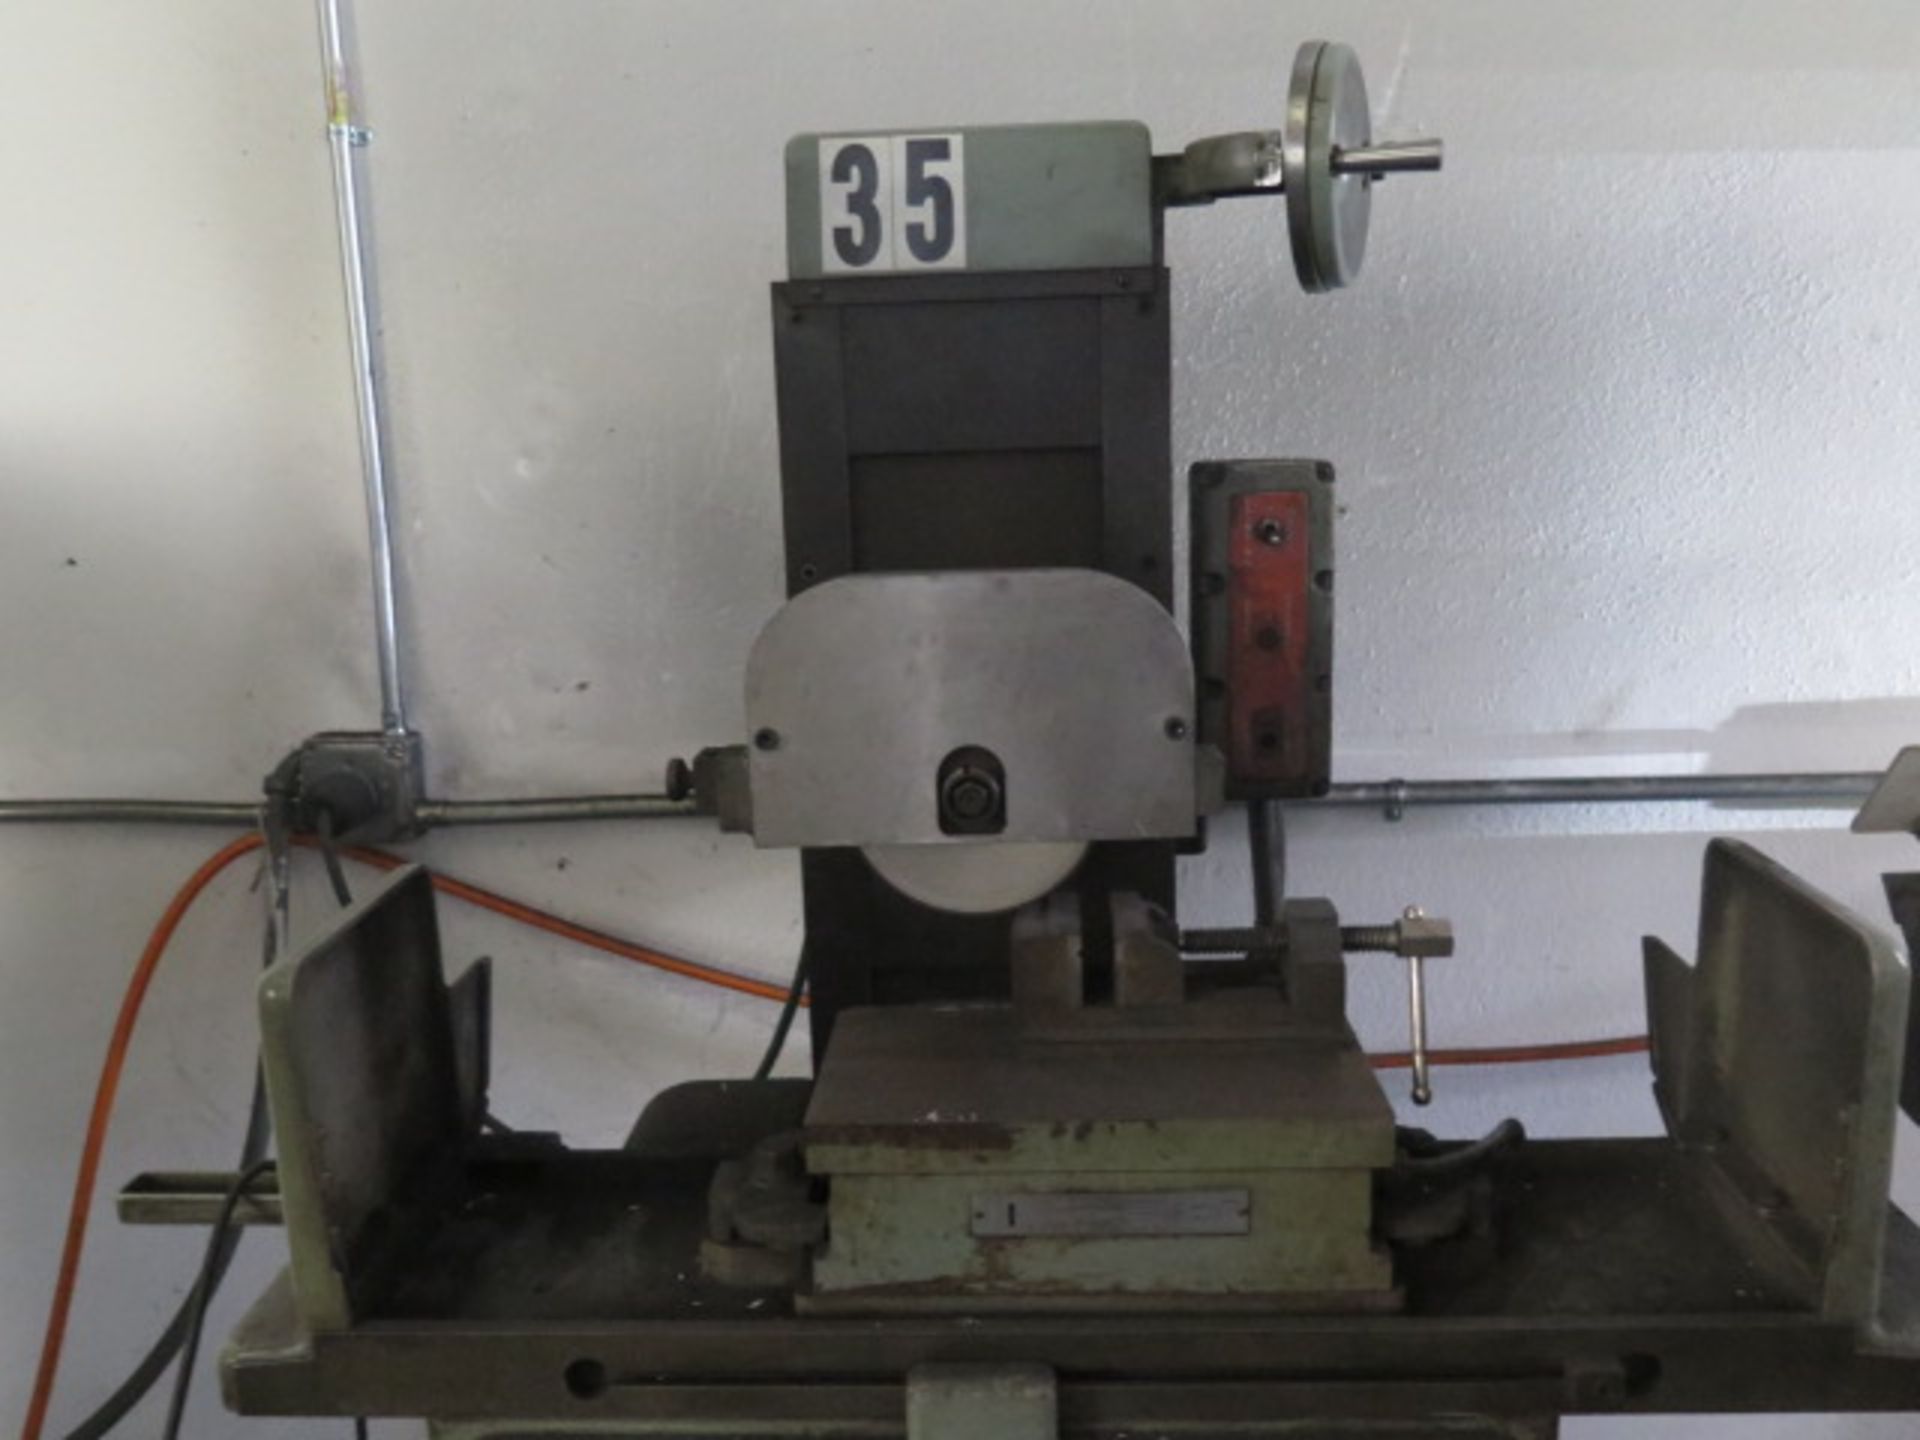 6” x 12” Surface Grinder e/ Magnalock Electromagnetic Chuck (SOLD AS-IS - NO WARRANTY) - Image 3 of 7